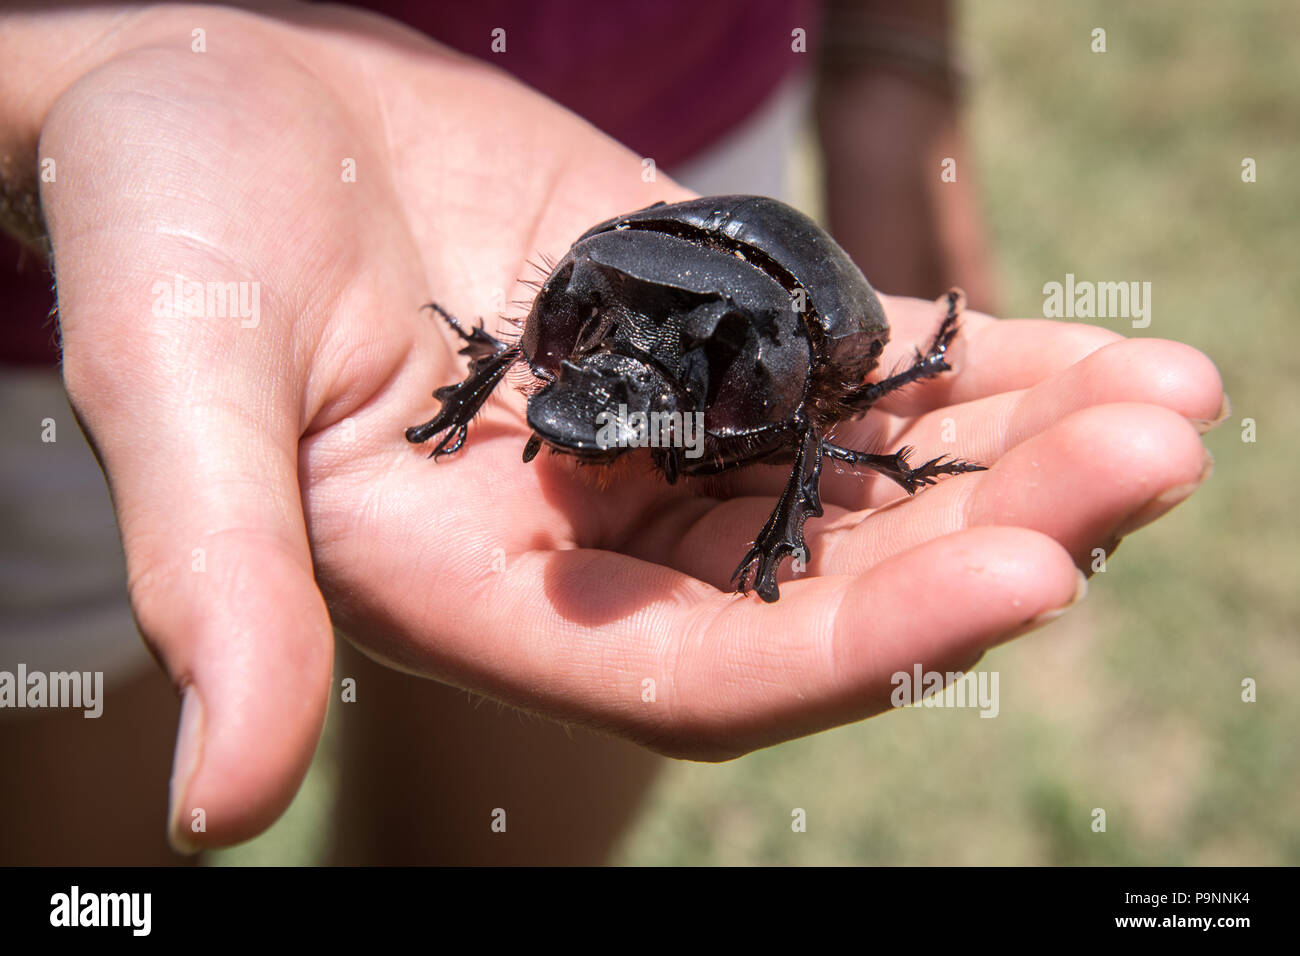 A dung beetle sits in in the palm of a hand. Hwange, Zimbabwe Stock Photo